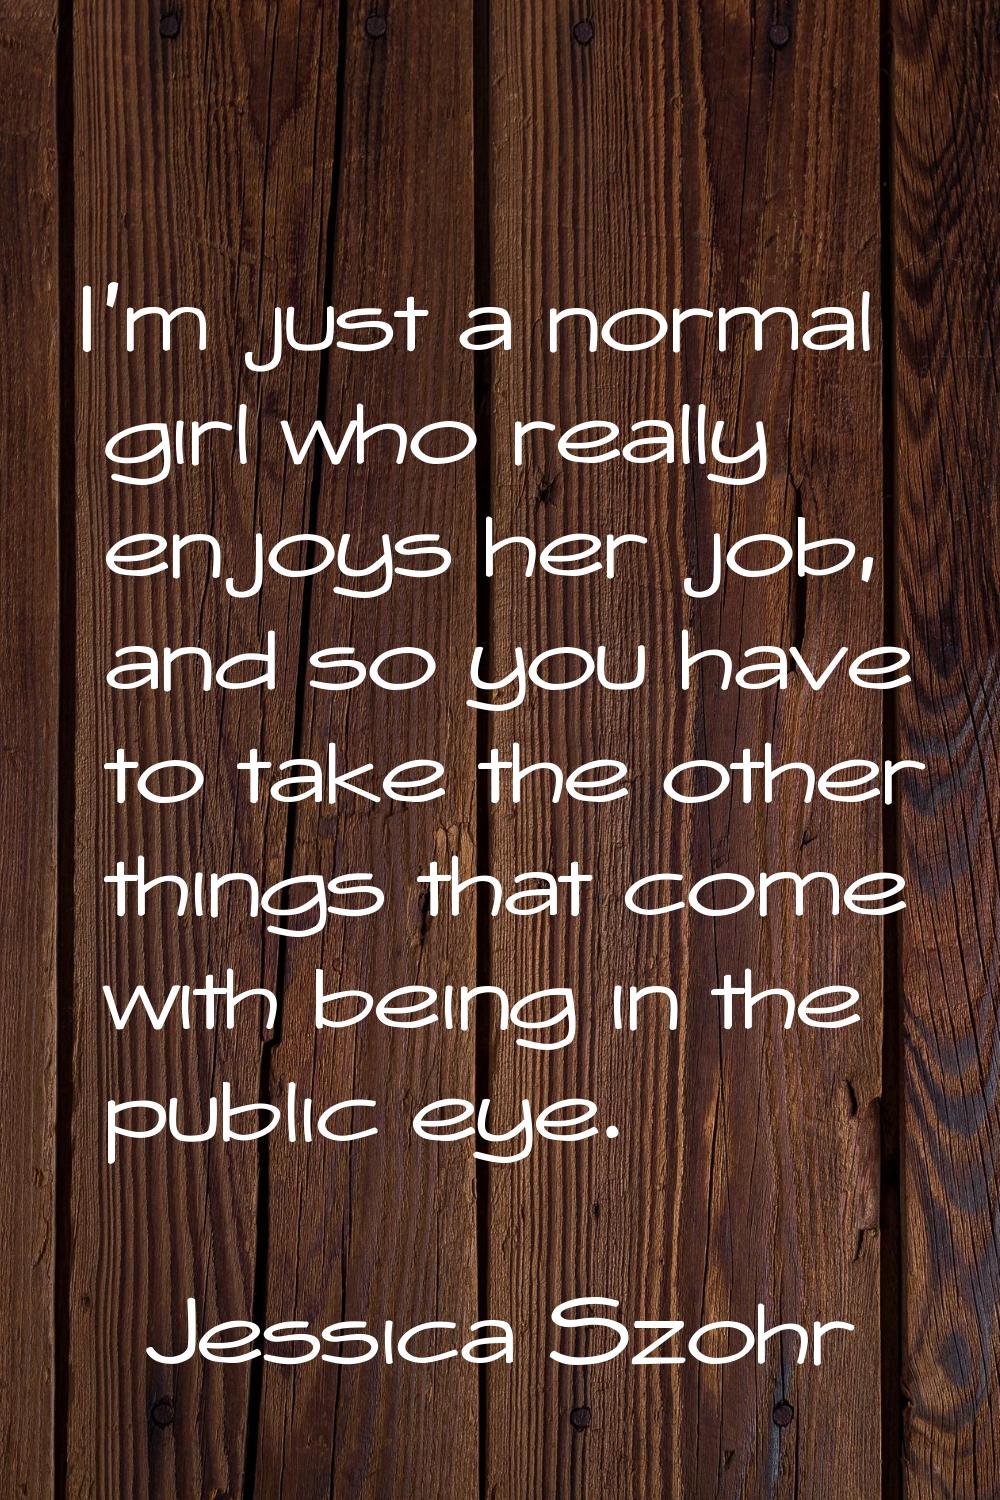 I'm just a normal girl who really enjoys her job, and so you have to take the other things that com